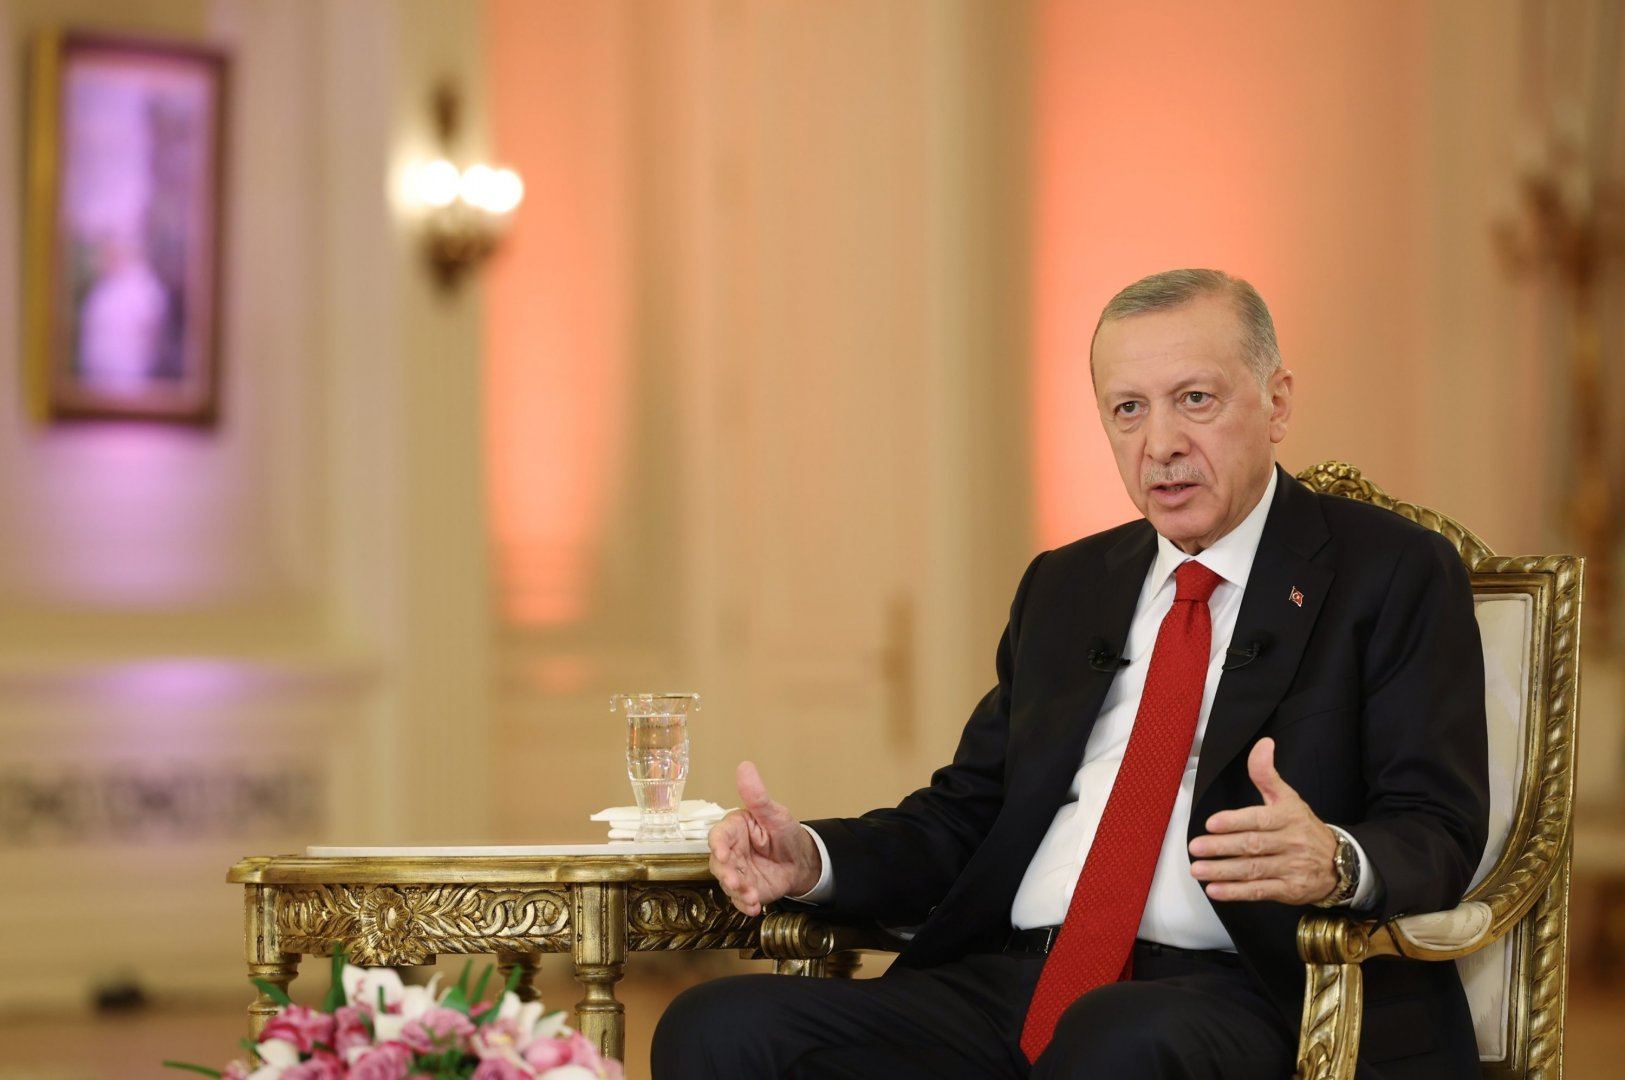 Results of first round of presidential elections in Türkiye show who people support - Erdogan